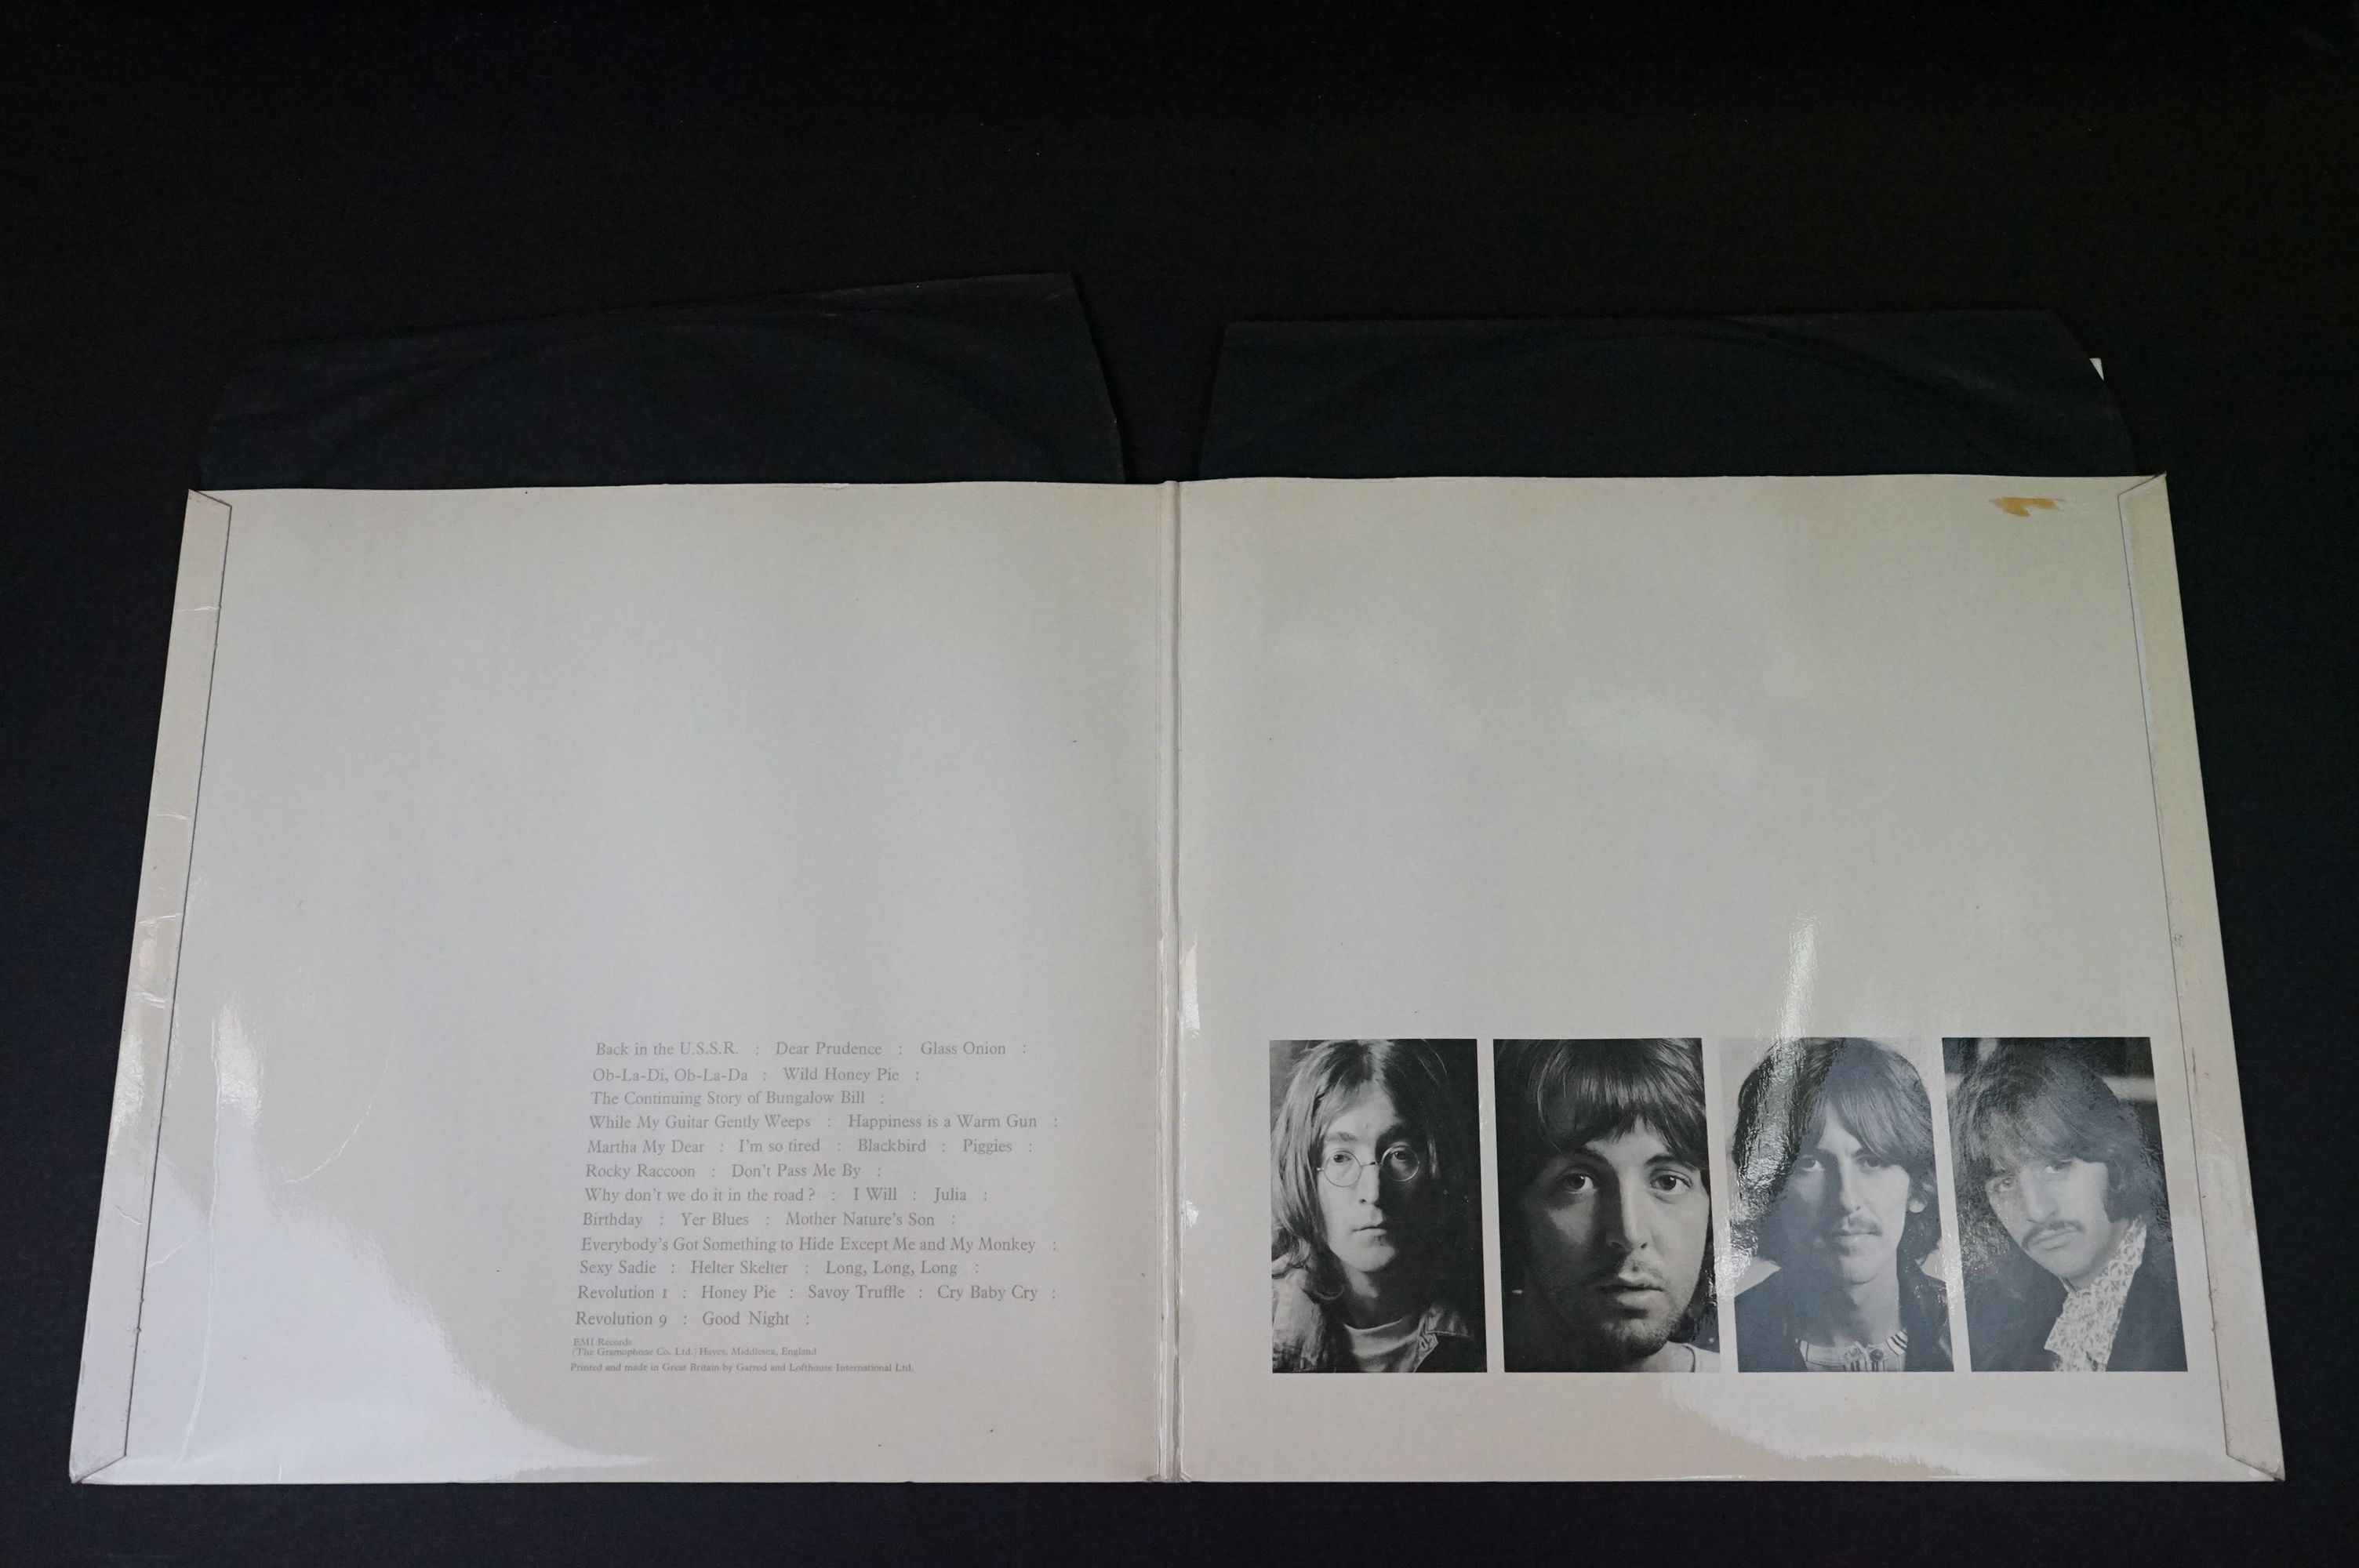 Vinyl - The Beatles White Album PCS 7067/8 low number 0016236. 4 photos and poster present. Sleeve - Image 3 of 9